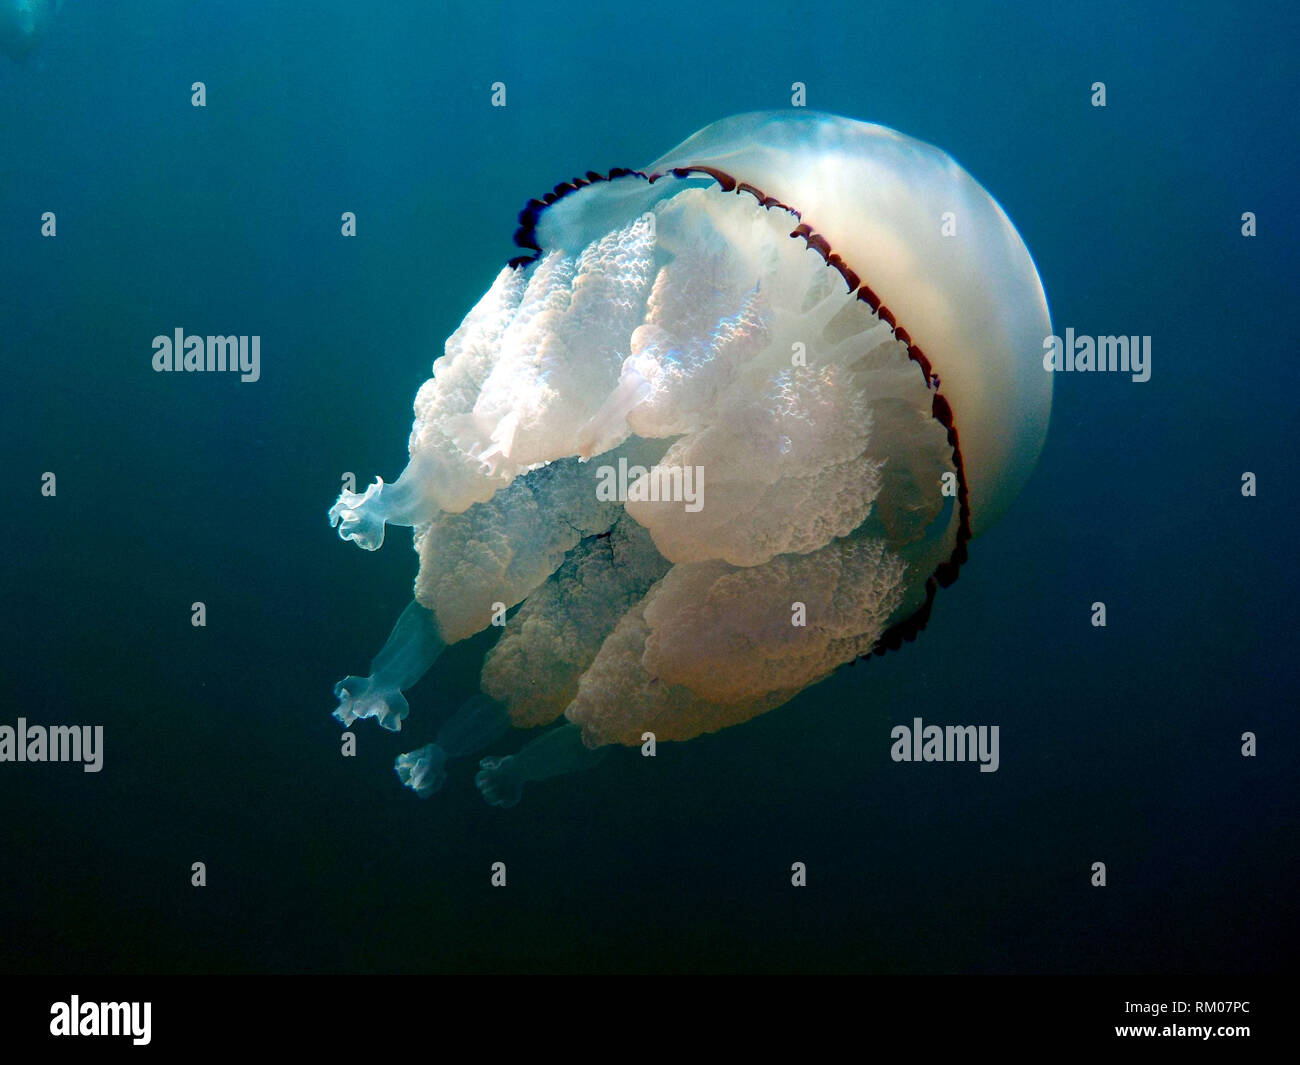 barrel jellyfish or dustbin-lid jellyfish or frilly-mouthed rhizostoma pulmo true jellyfish class scyphozoa is gently carried away by the sea current Stock Photo